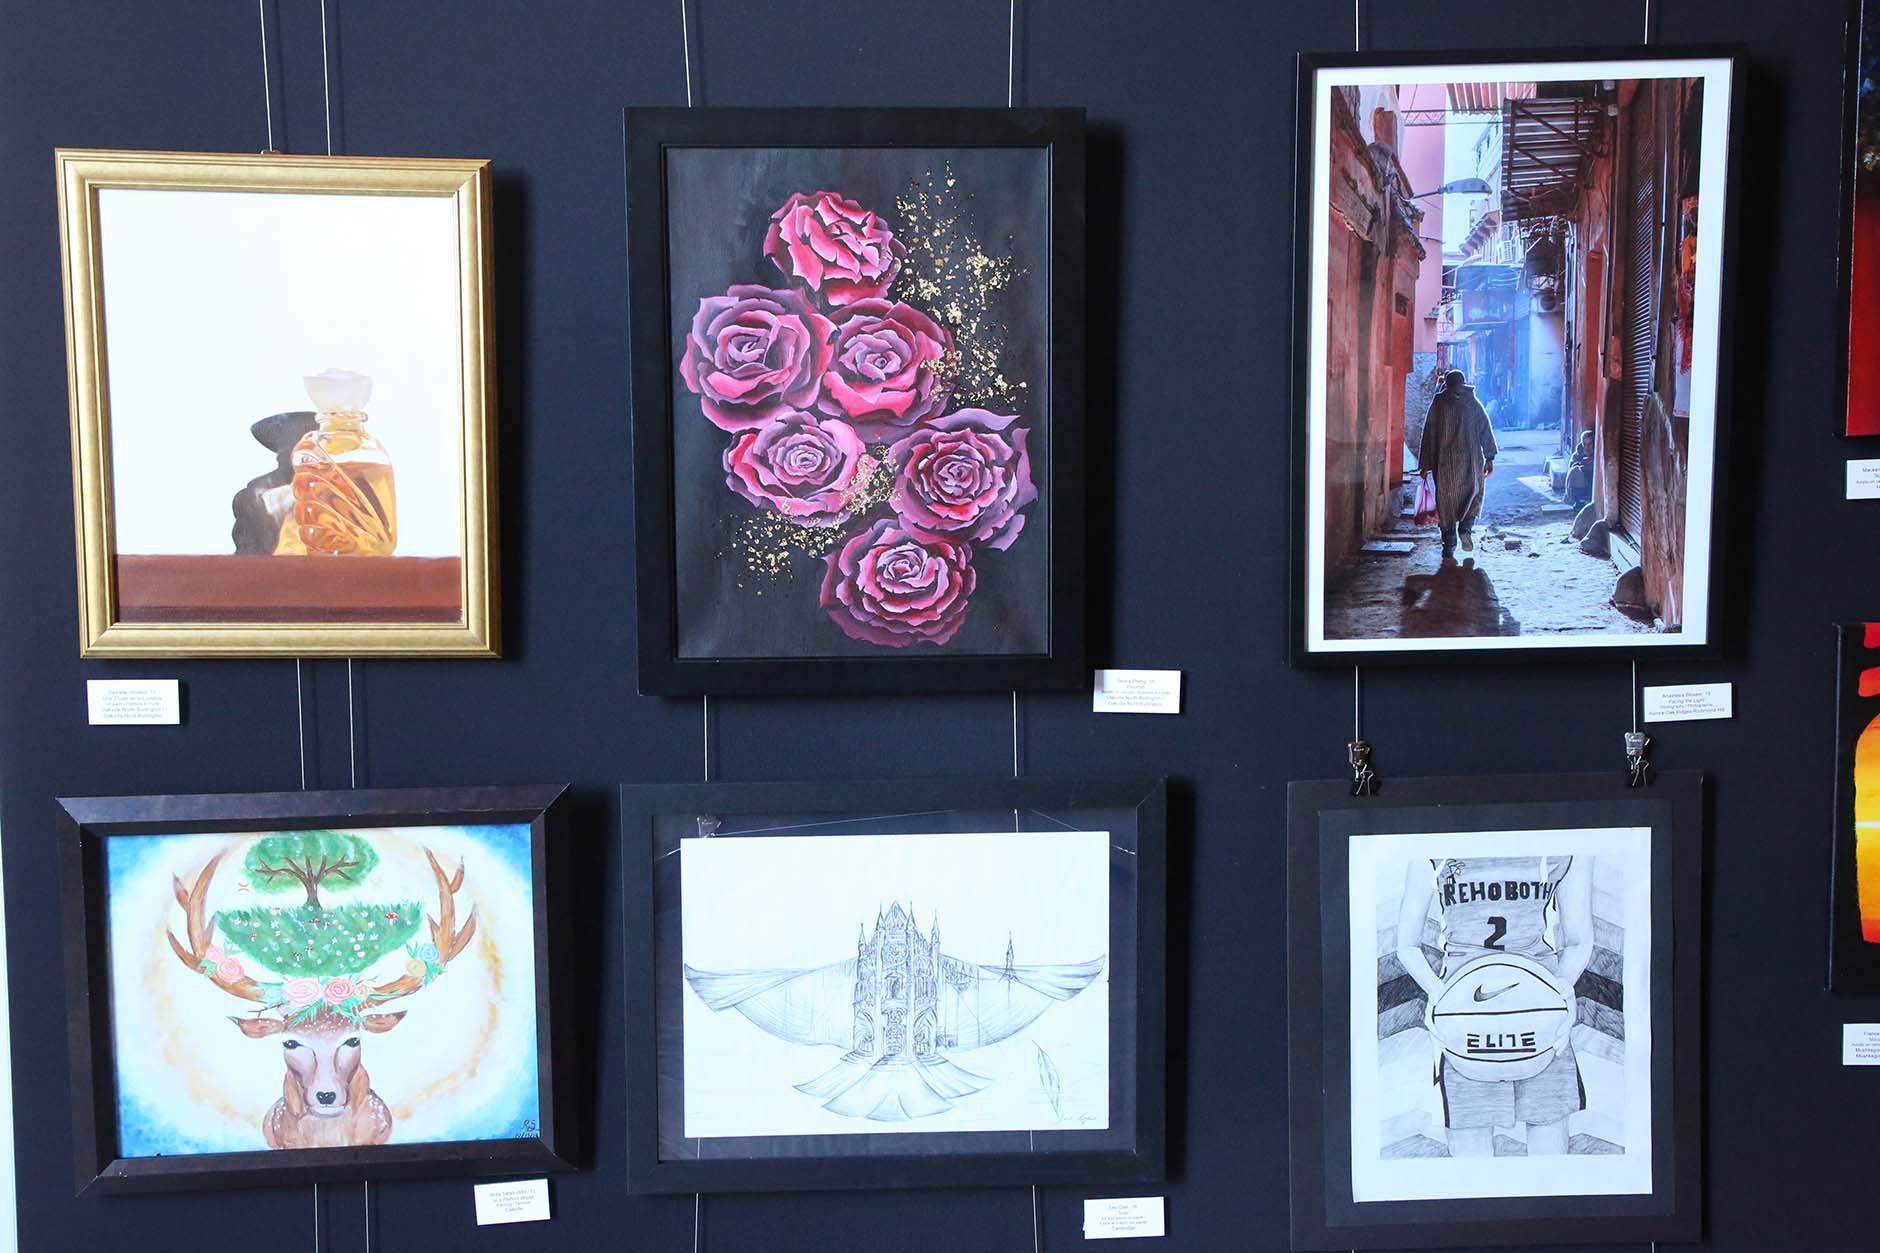 Photography, paintings and drawings by student artists in the 2020 Youth Arts Program.